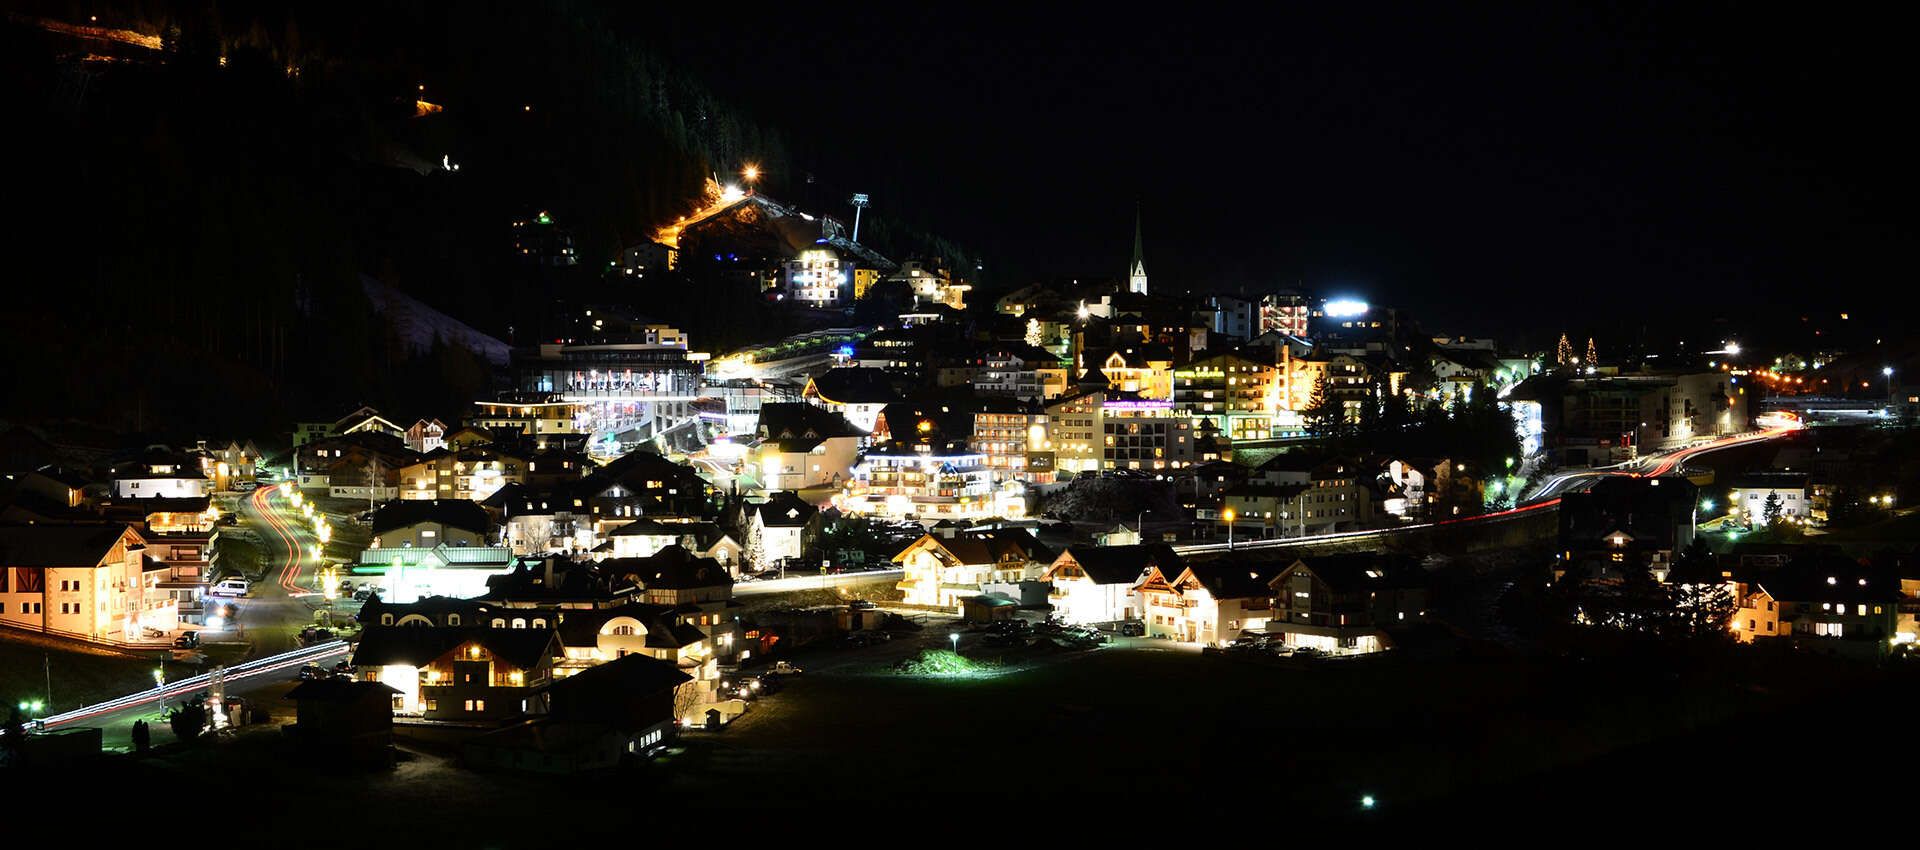 Ischgl at night View of the town